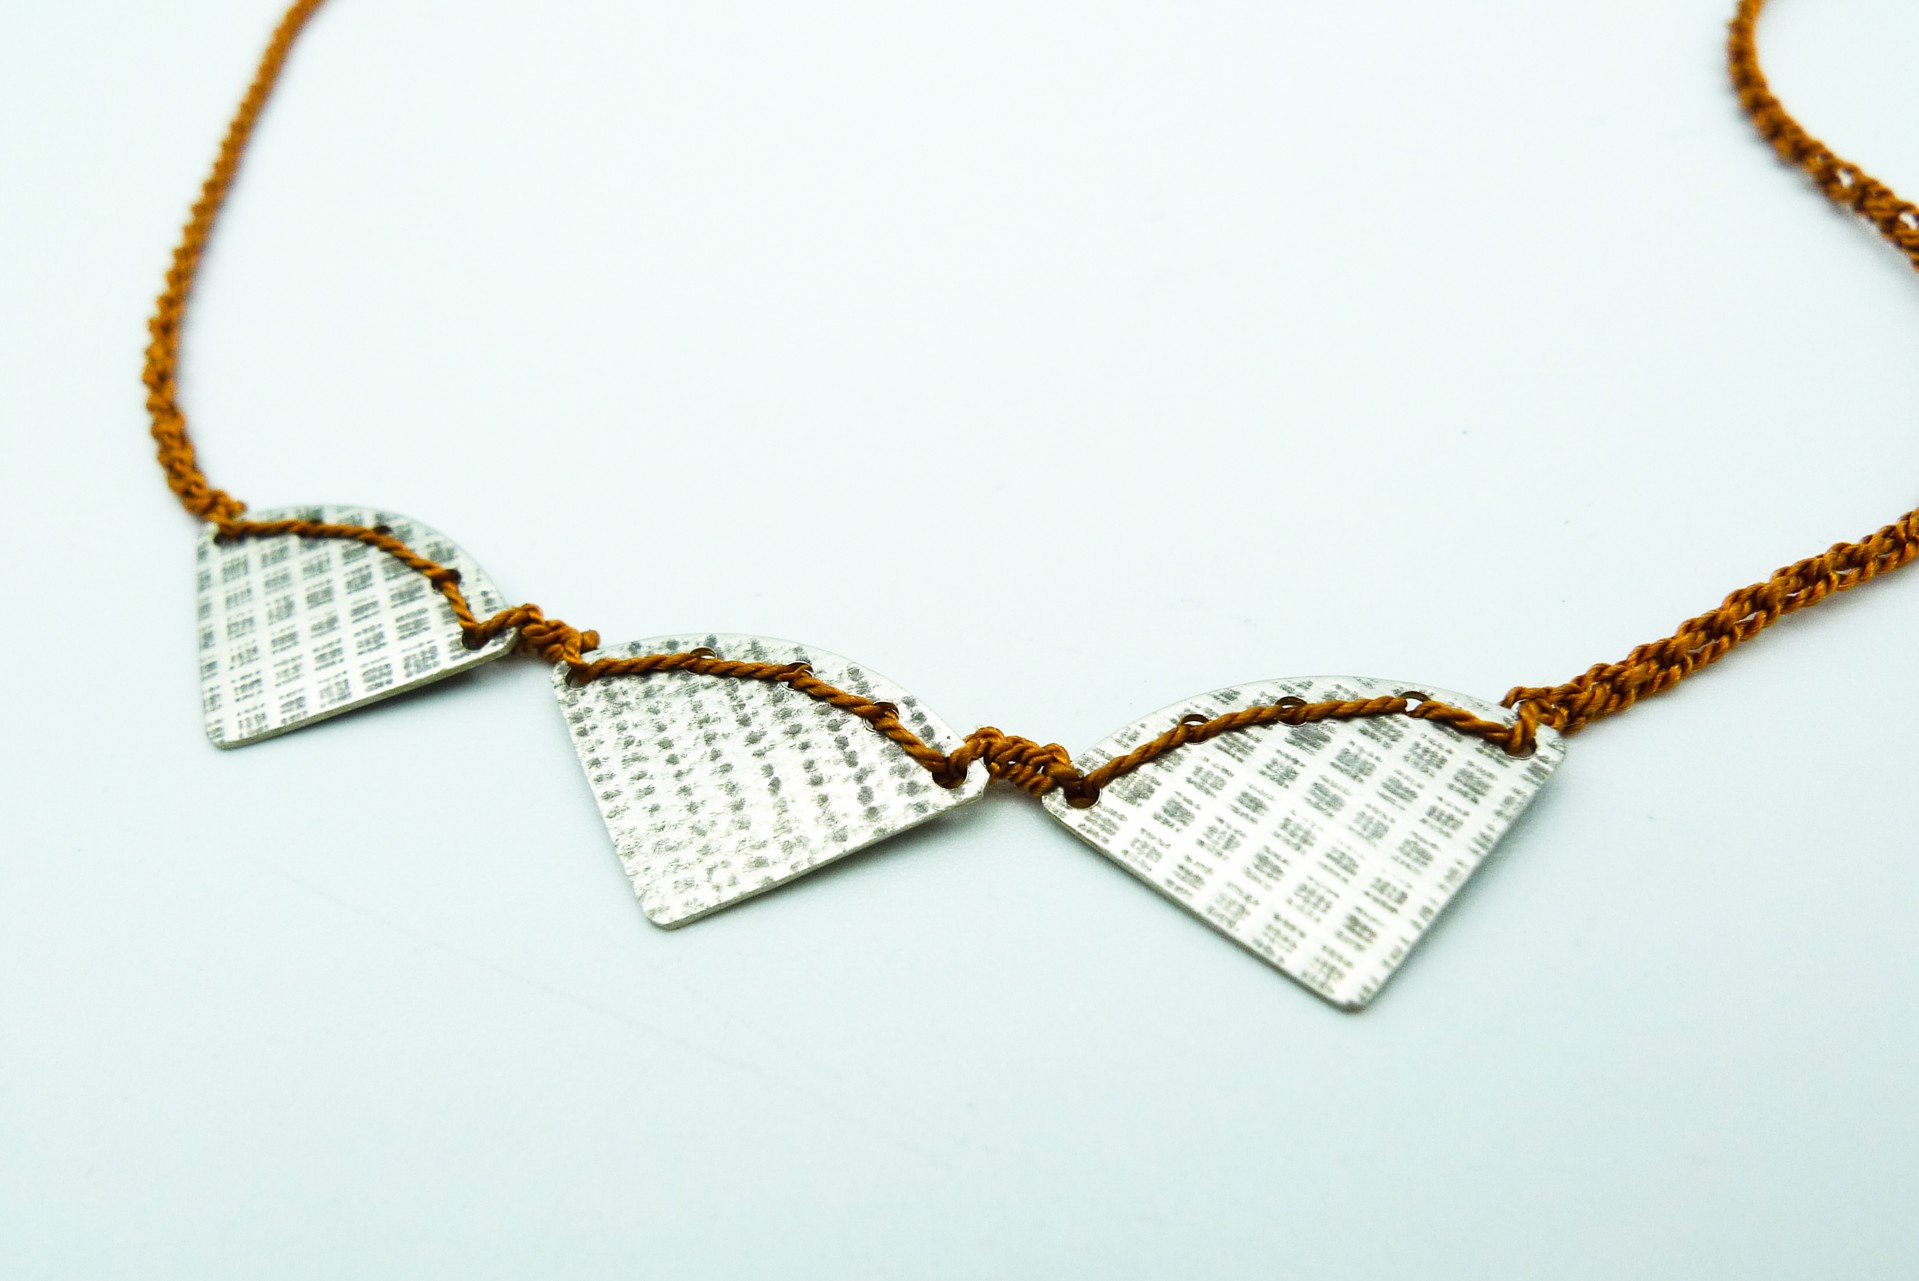 Necklace with Copper Colored Silk Thread by Erica Schlueter